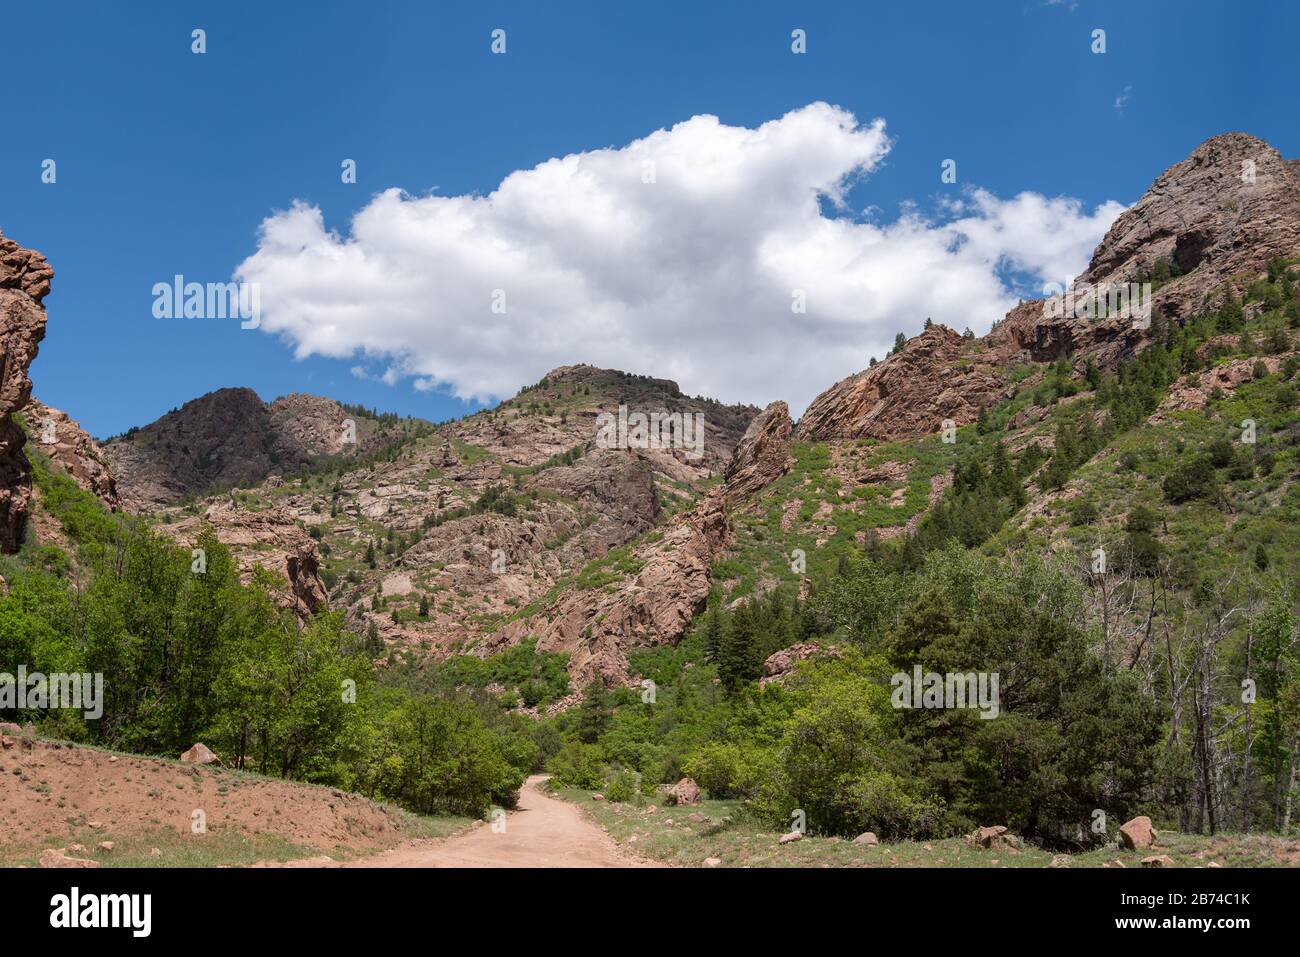 Low angle landscape of trees and rocky hillsides or mountains along the Shelf Road near Cripple Creek, Colorado Stock Photo